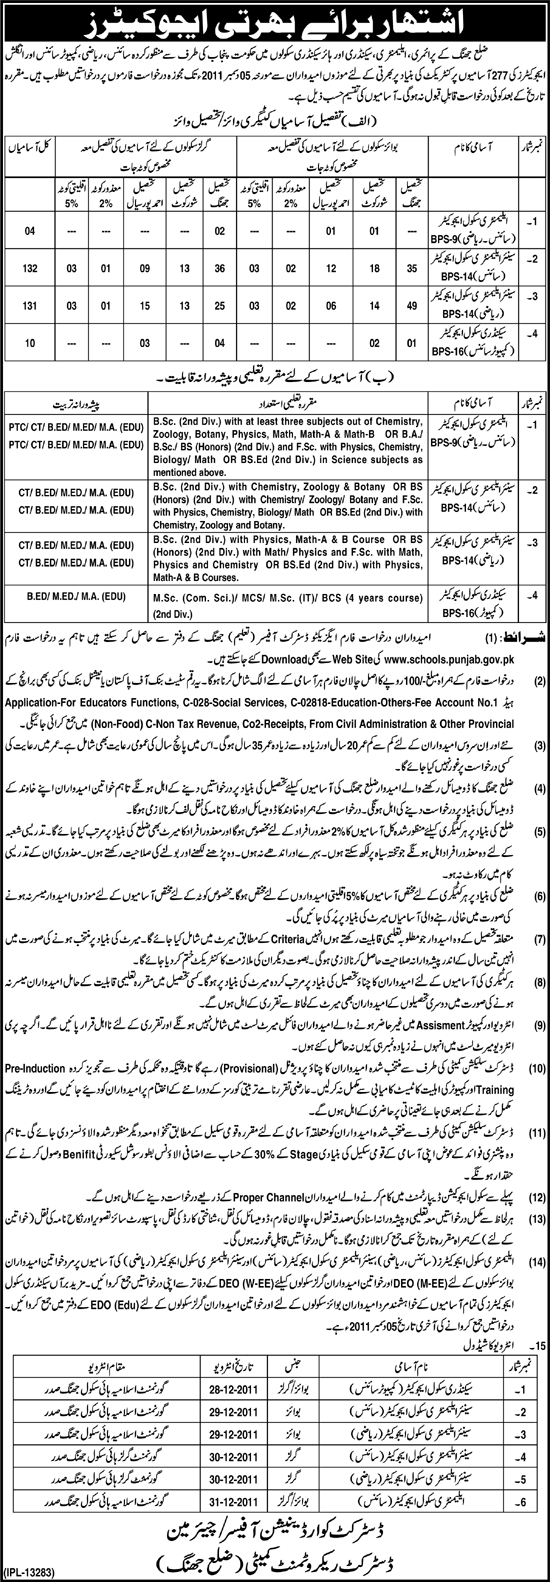 Educators Required by Government of the Punjab, for Jhang District